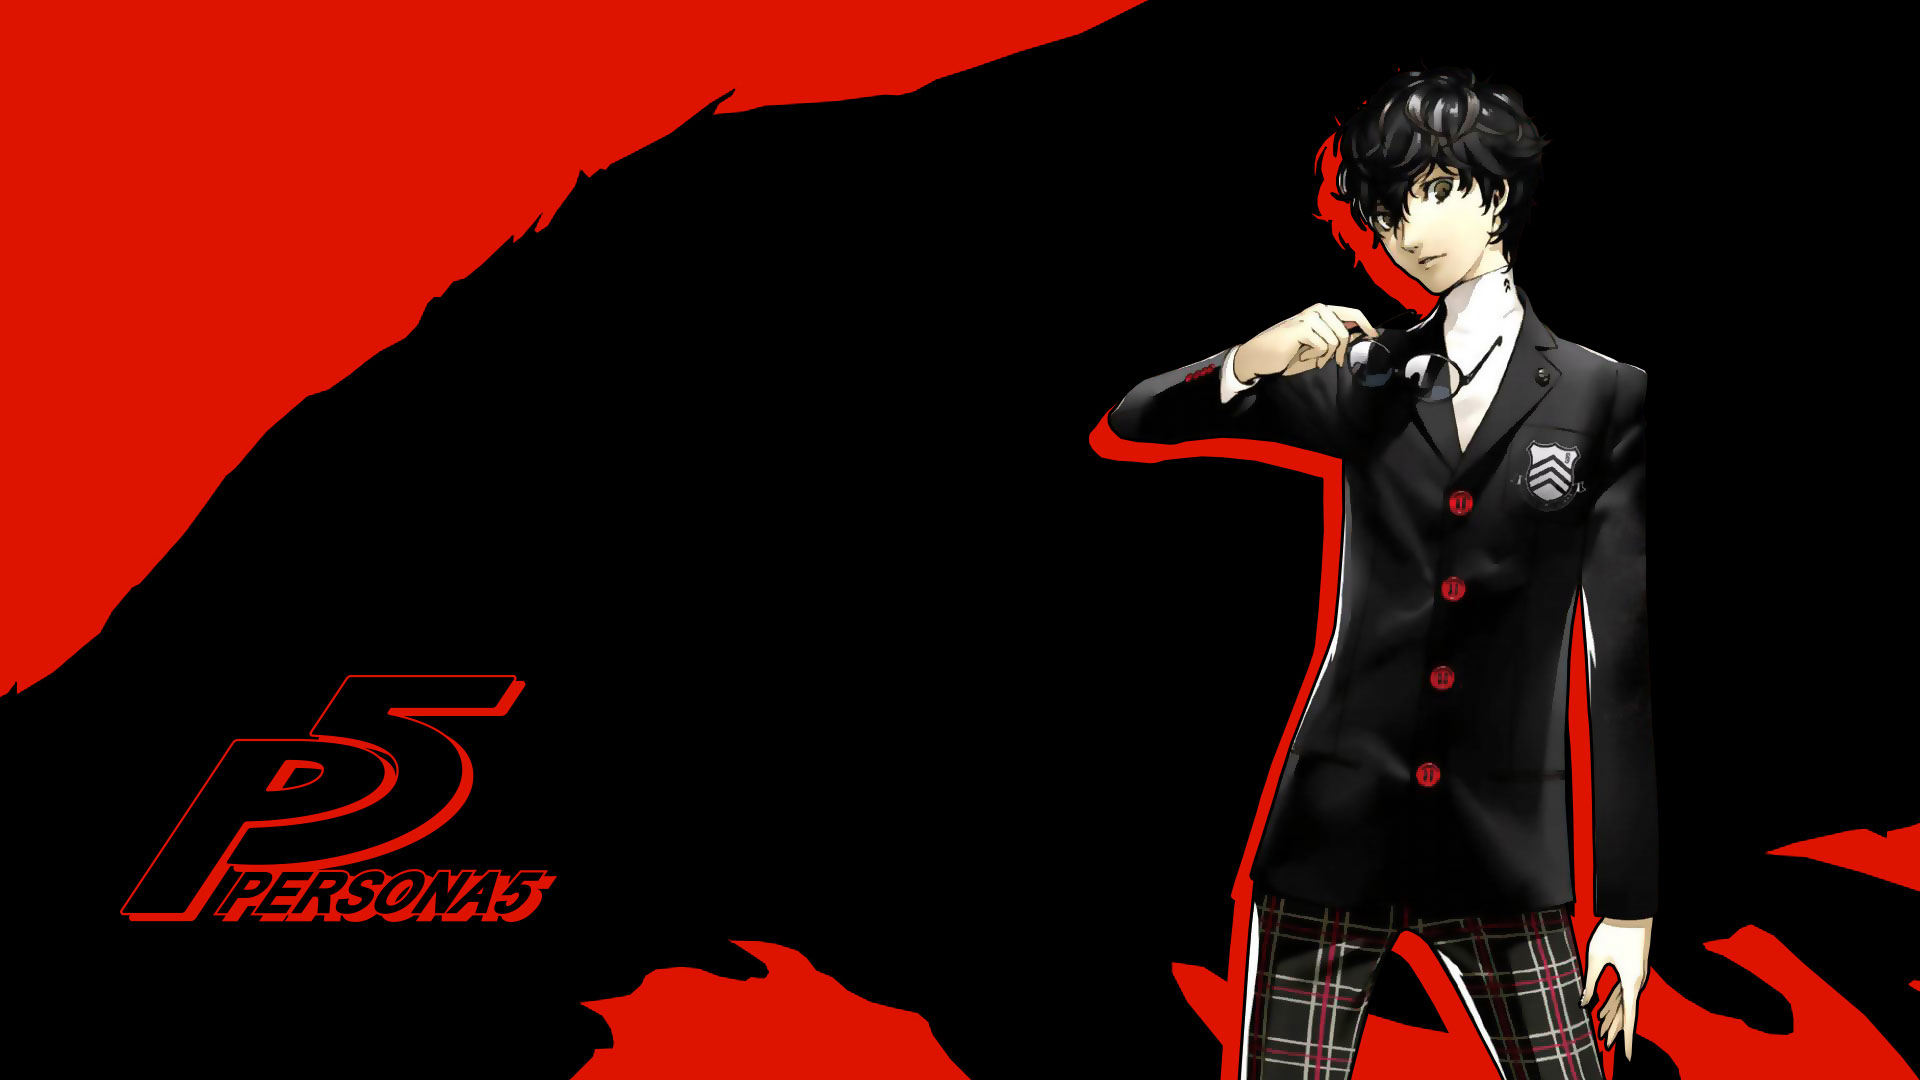 persona wallpaper,red,cartoon,anime,graphic design,fictional character